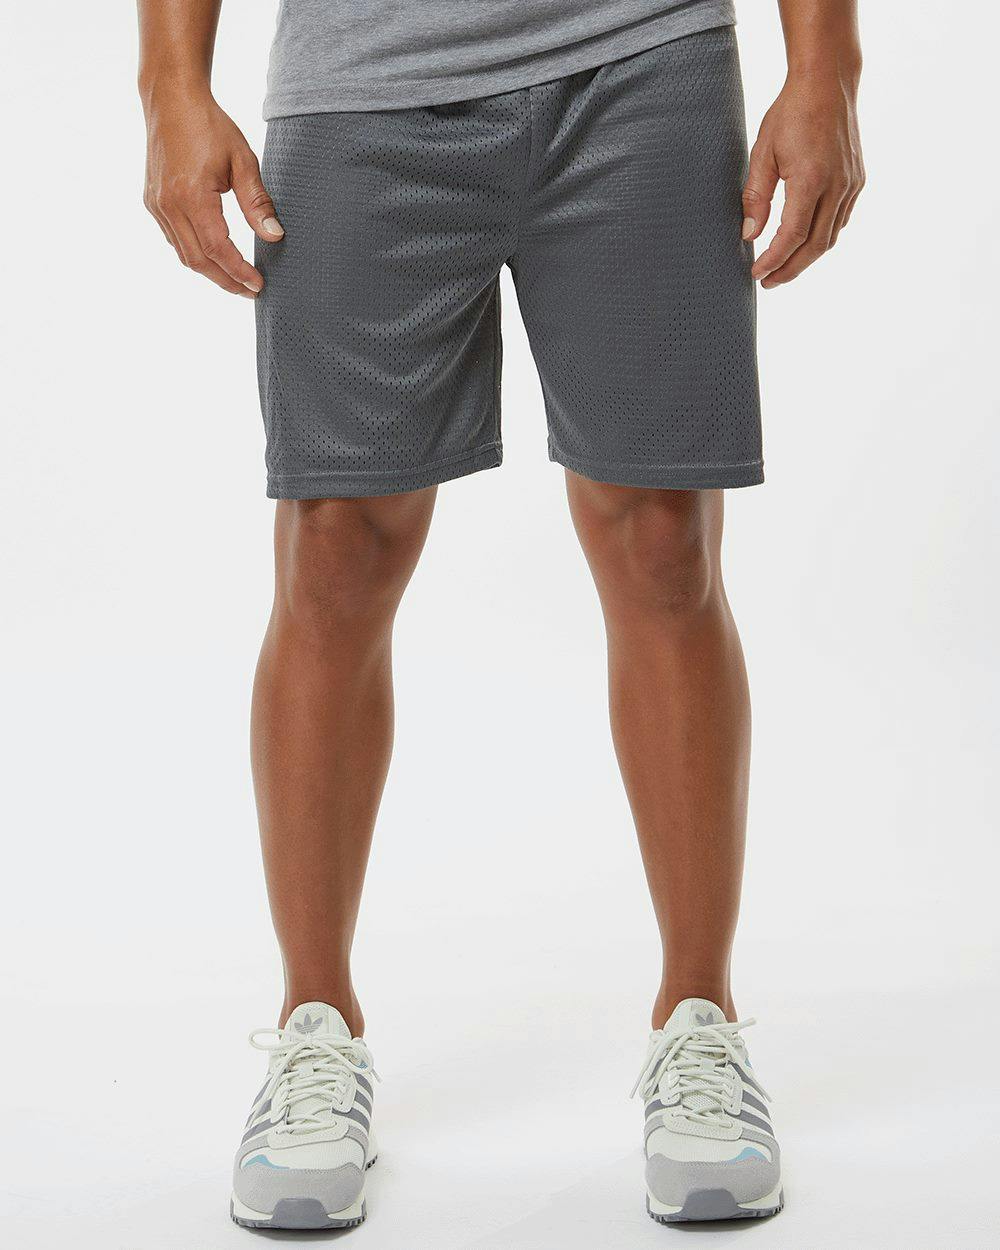 Image for Mesh 7" Shorts - 5107